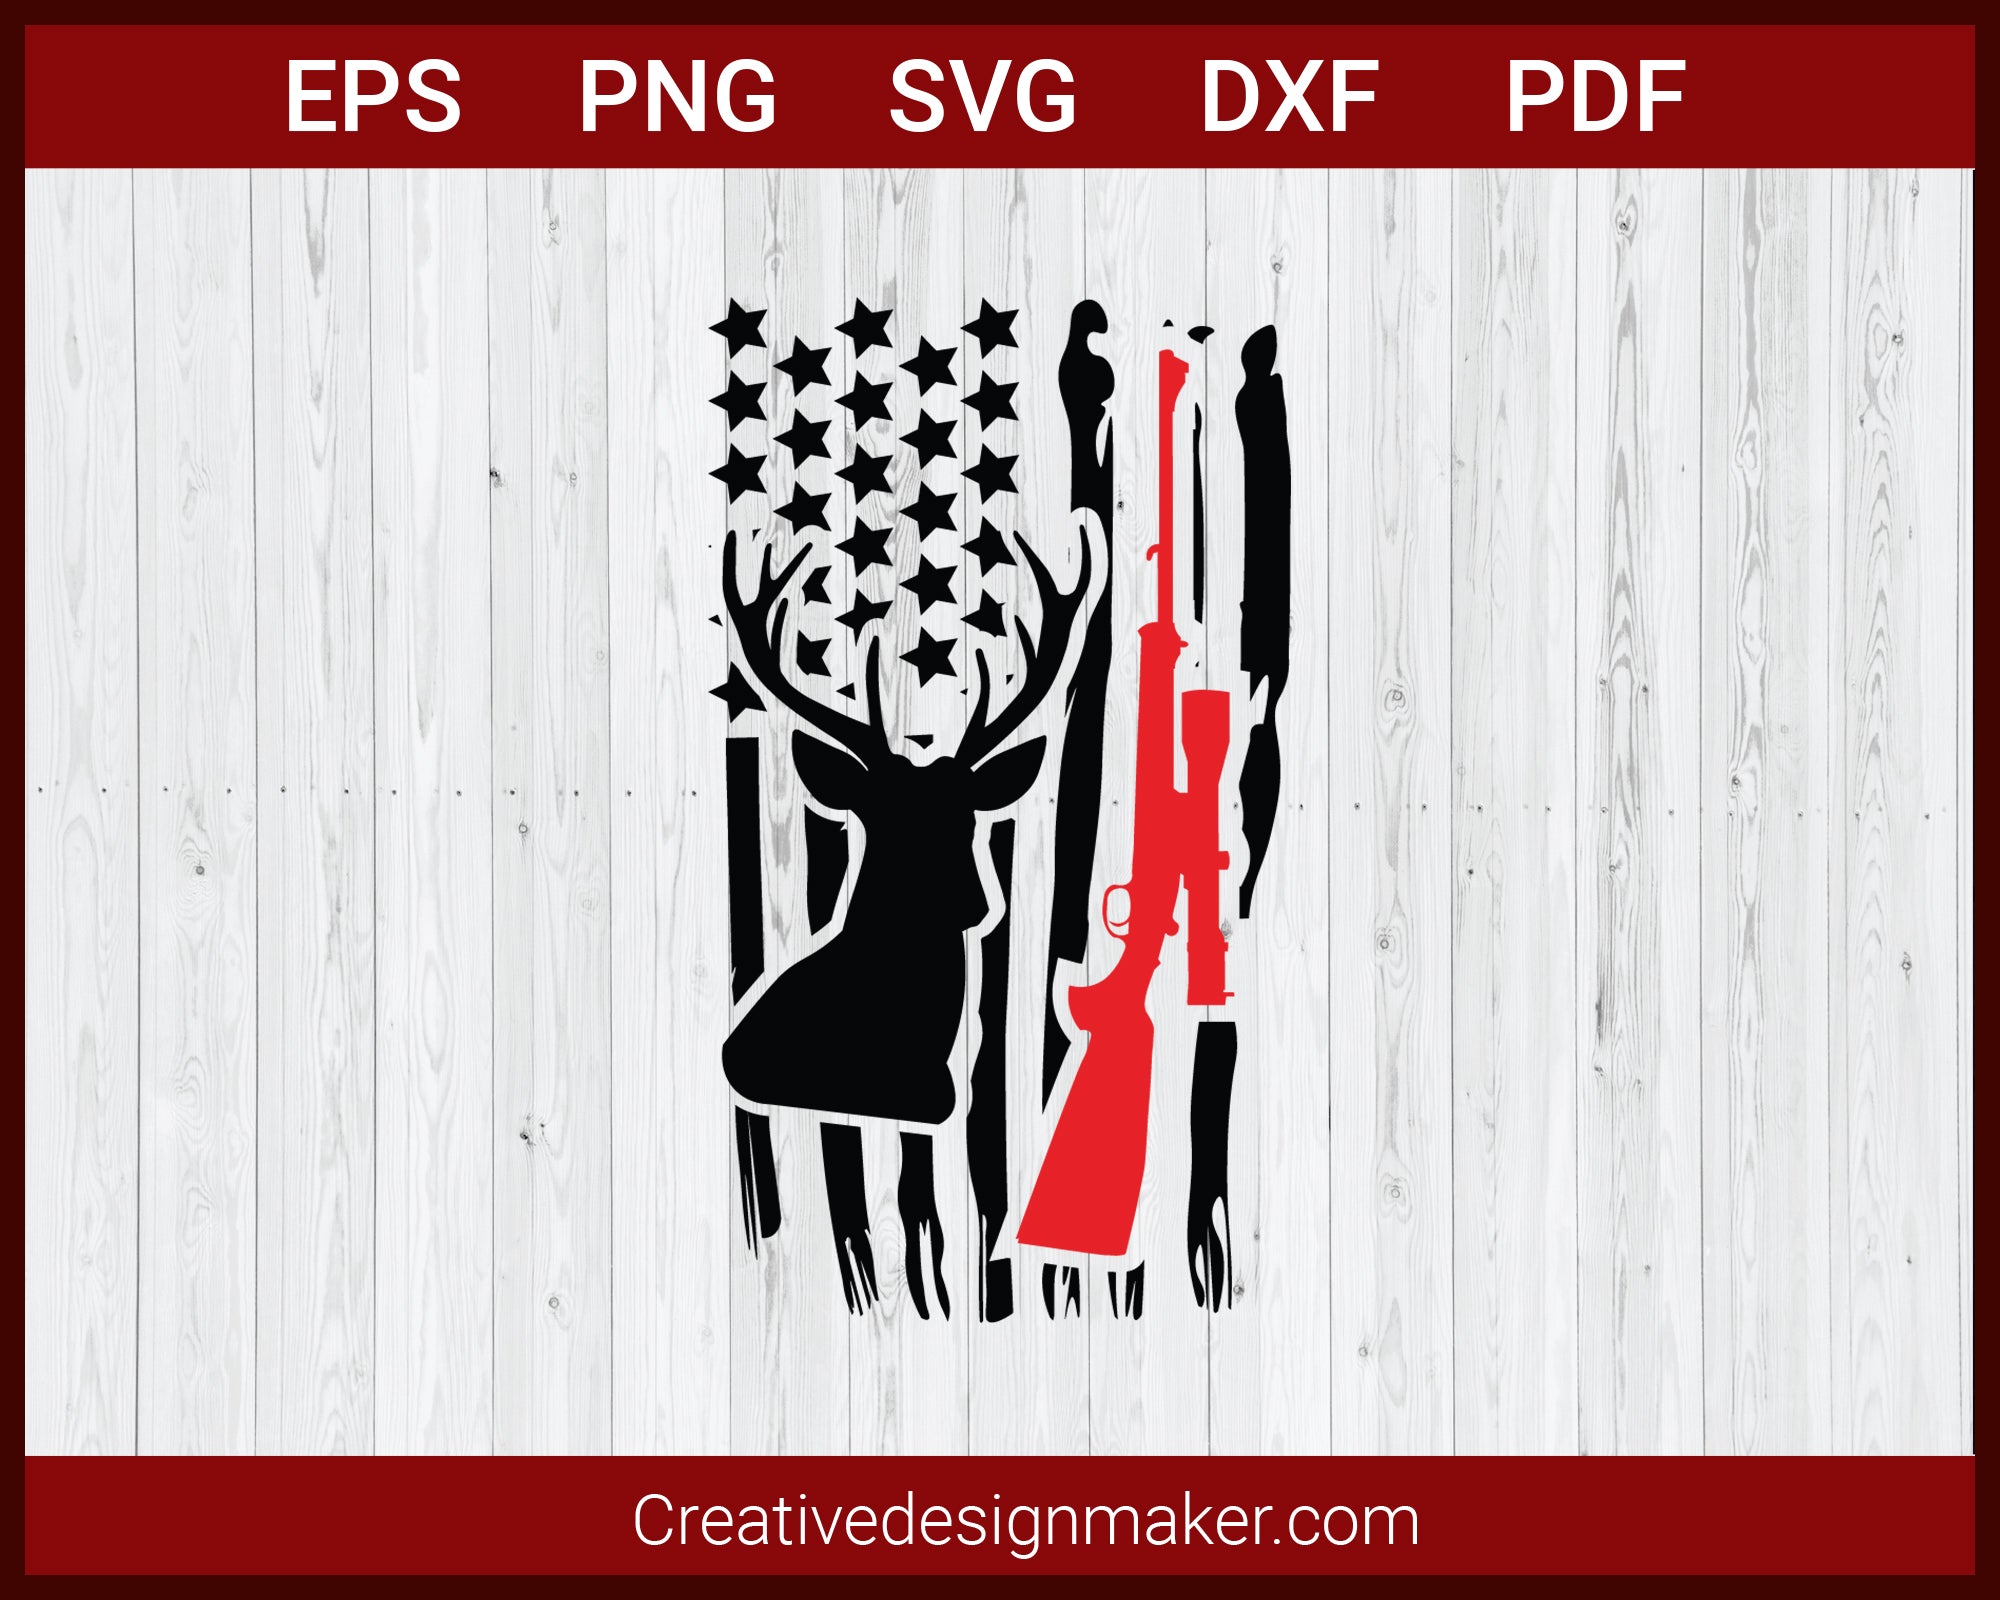 Deer Hunting Distressed Flag SVG Cricut Silhouette DXF PNG EPS Cut File